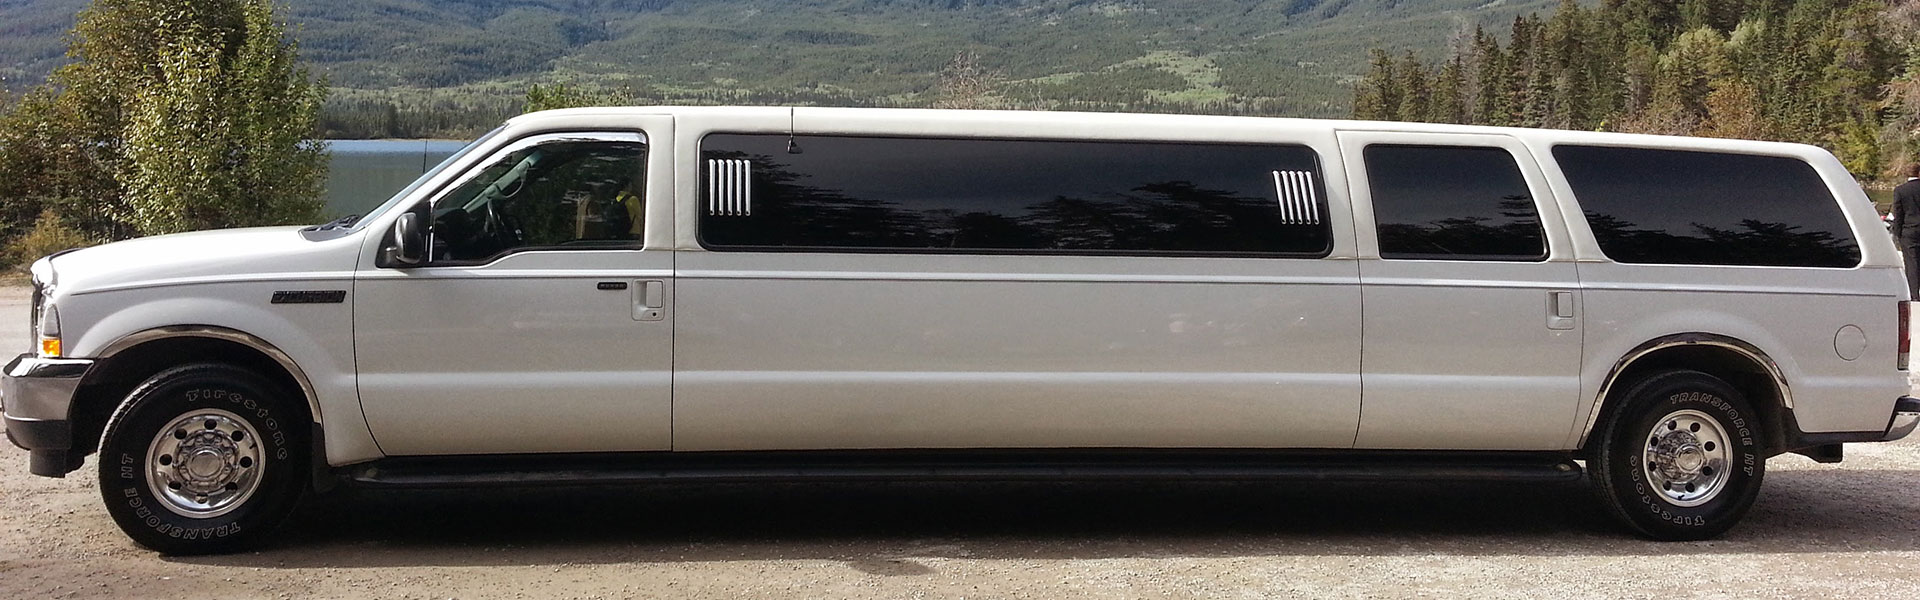 Contact Okanagan Limousine for all your BC limo requirements.